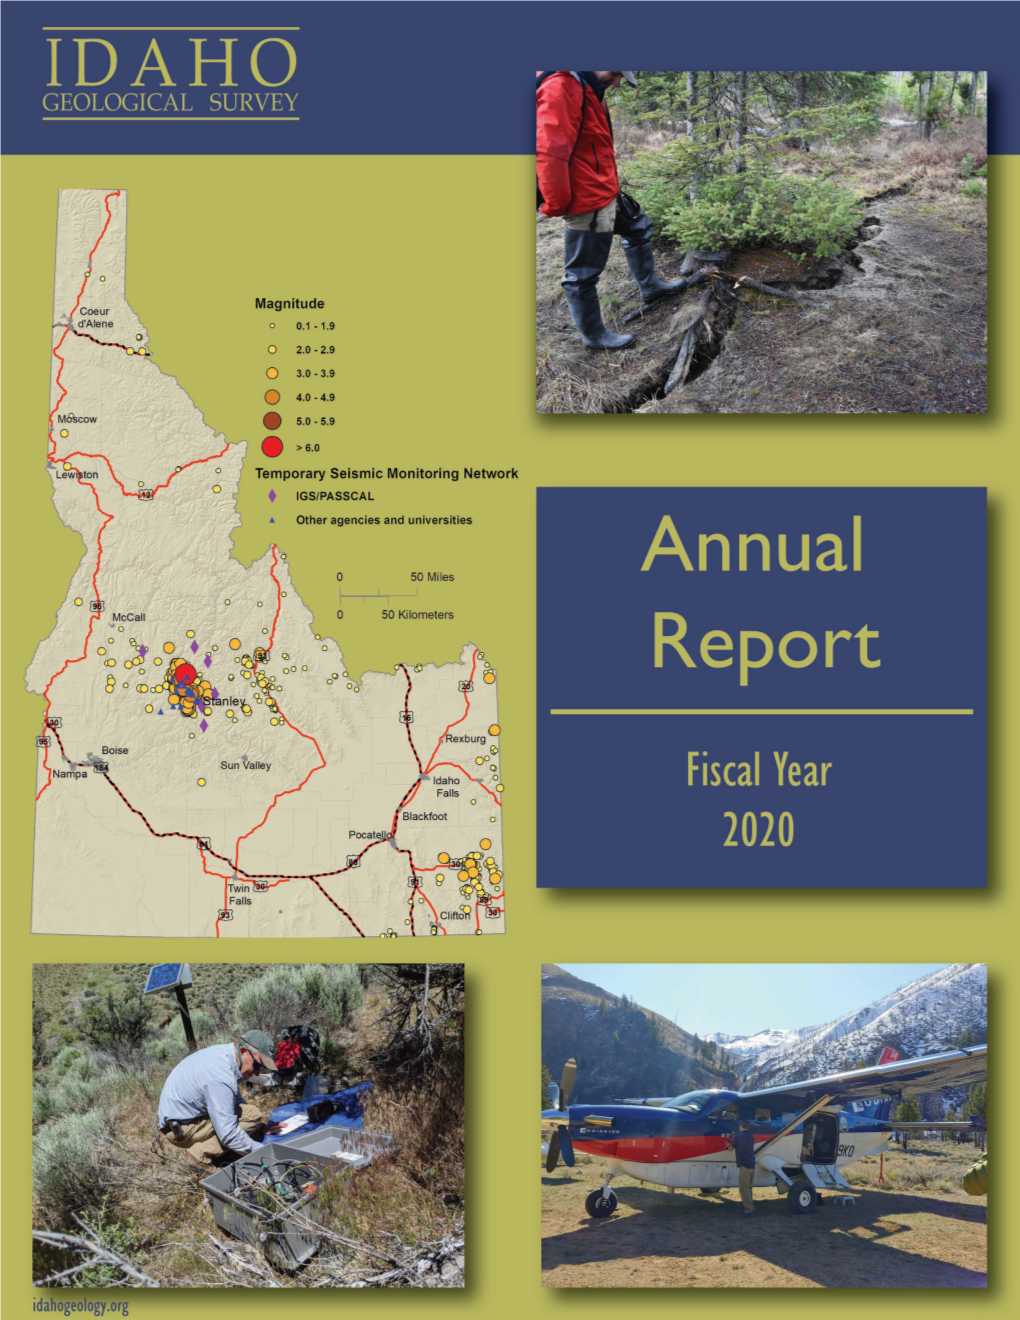 Download FY 2020 Annual Report